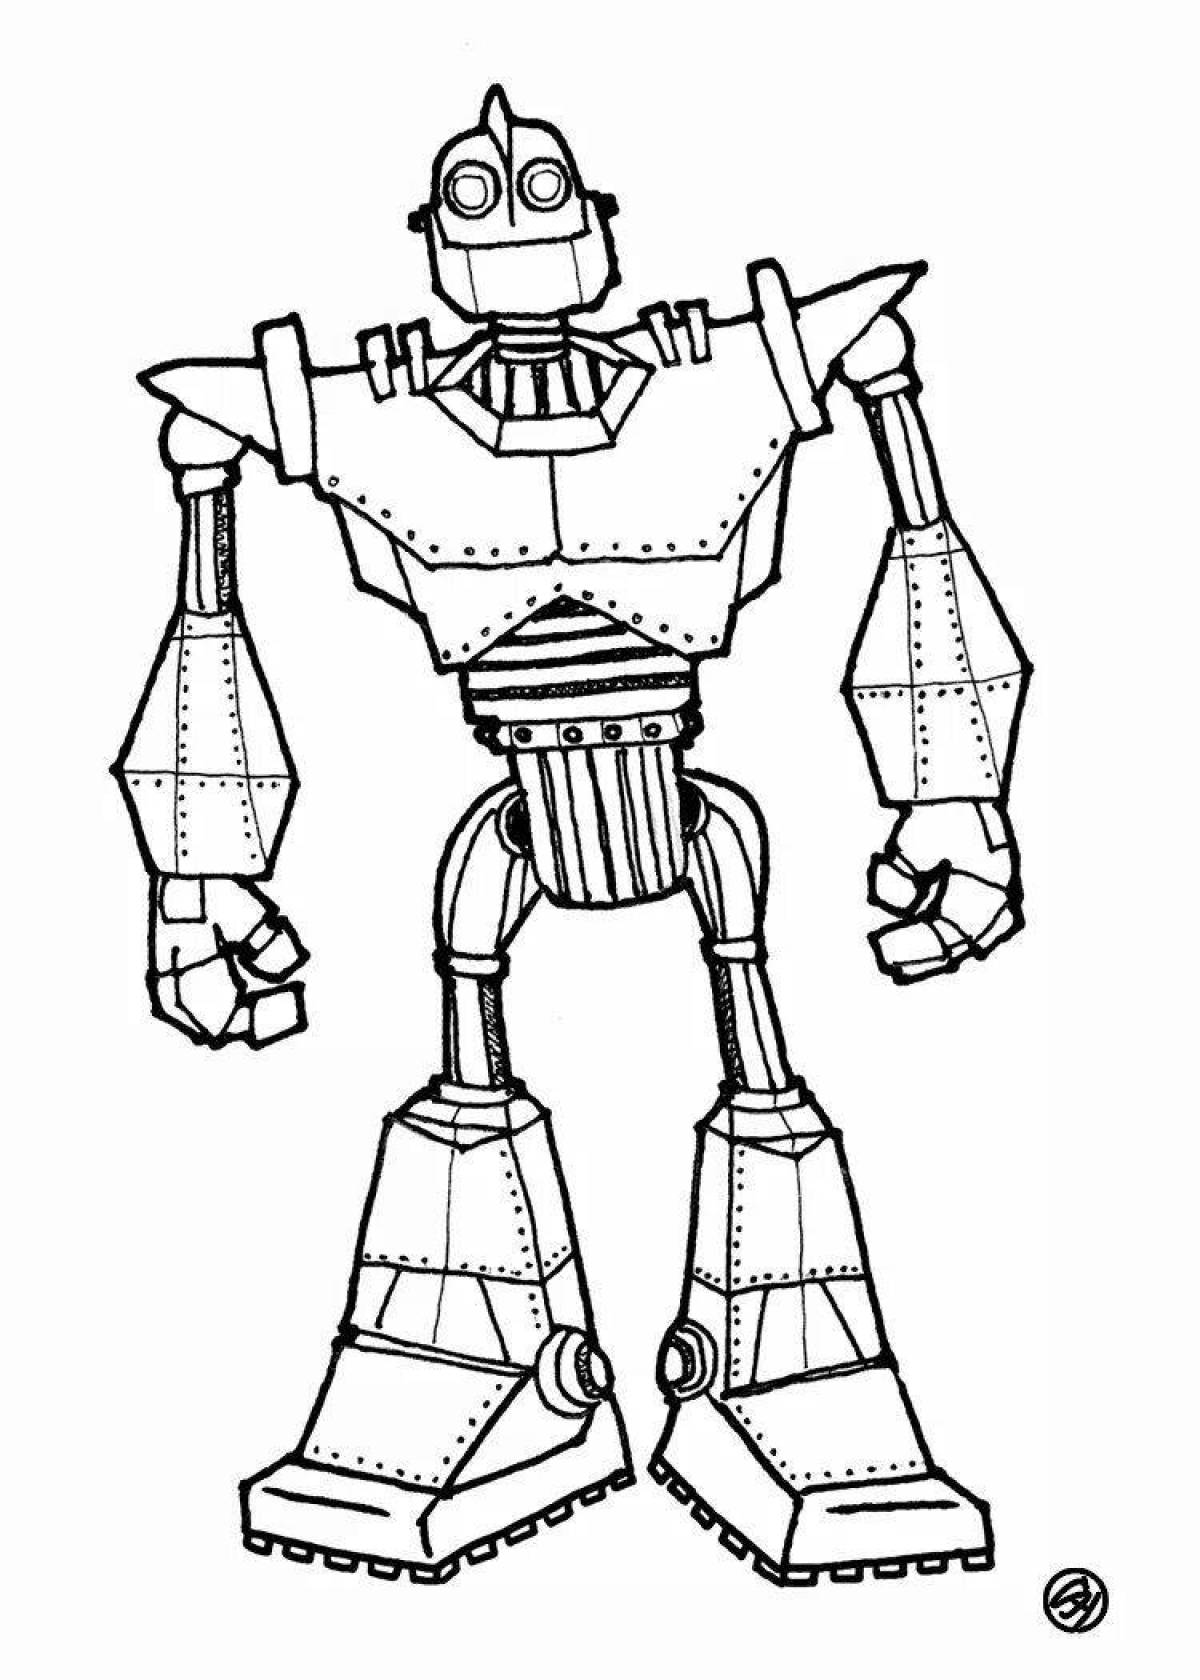 Adorable robot coloring book for 7 year olds